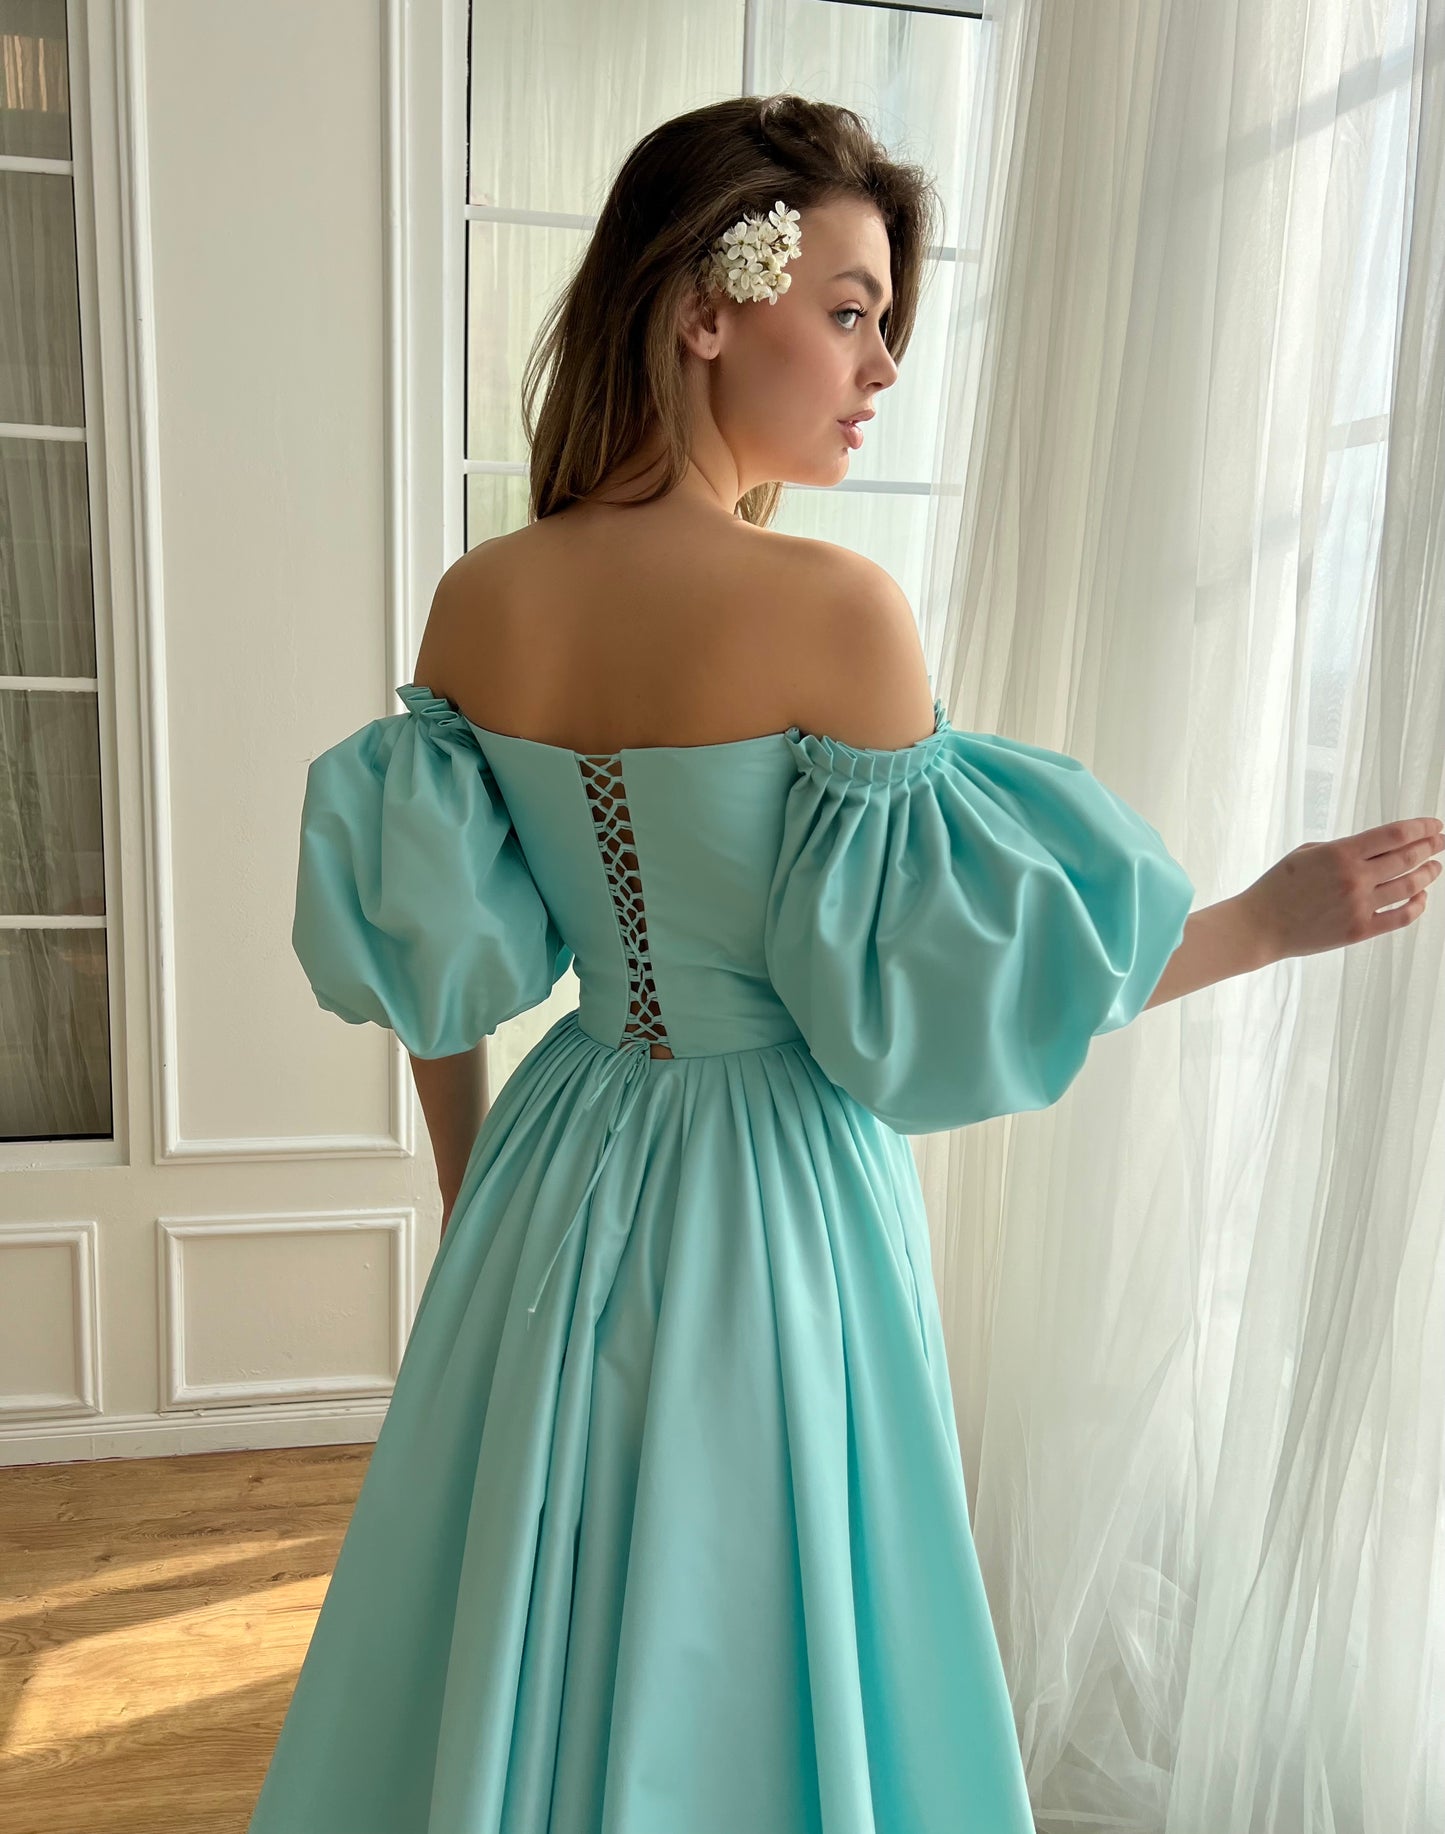 Blue A-Line dress with short off the shoulder sleeves